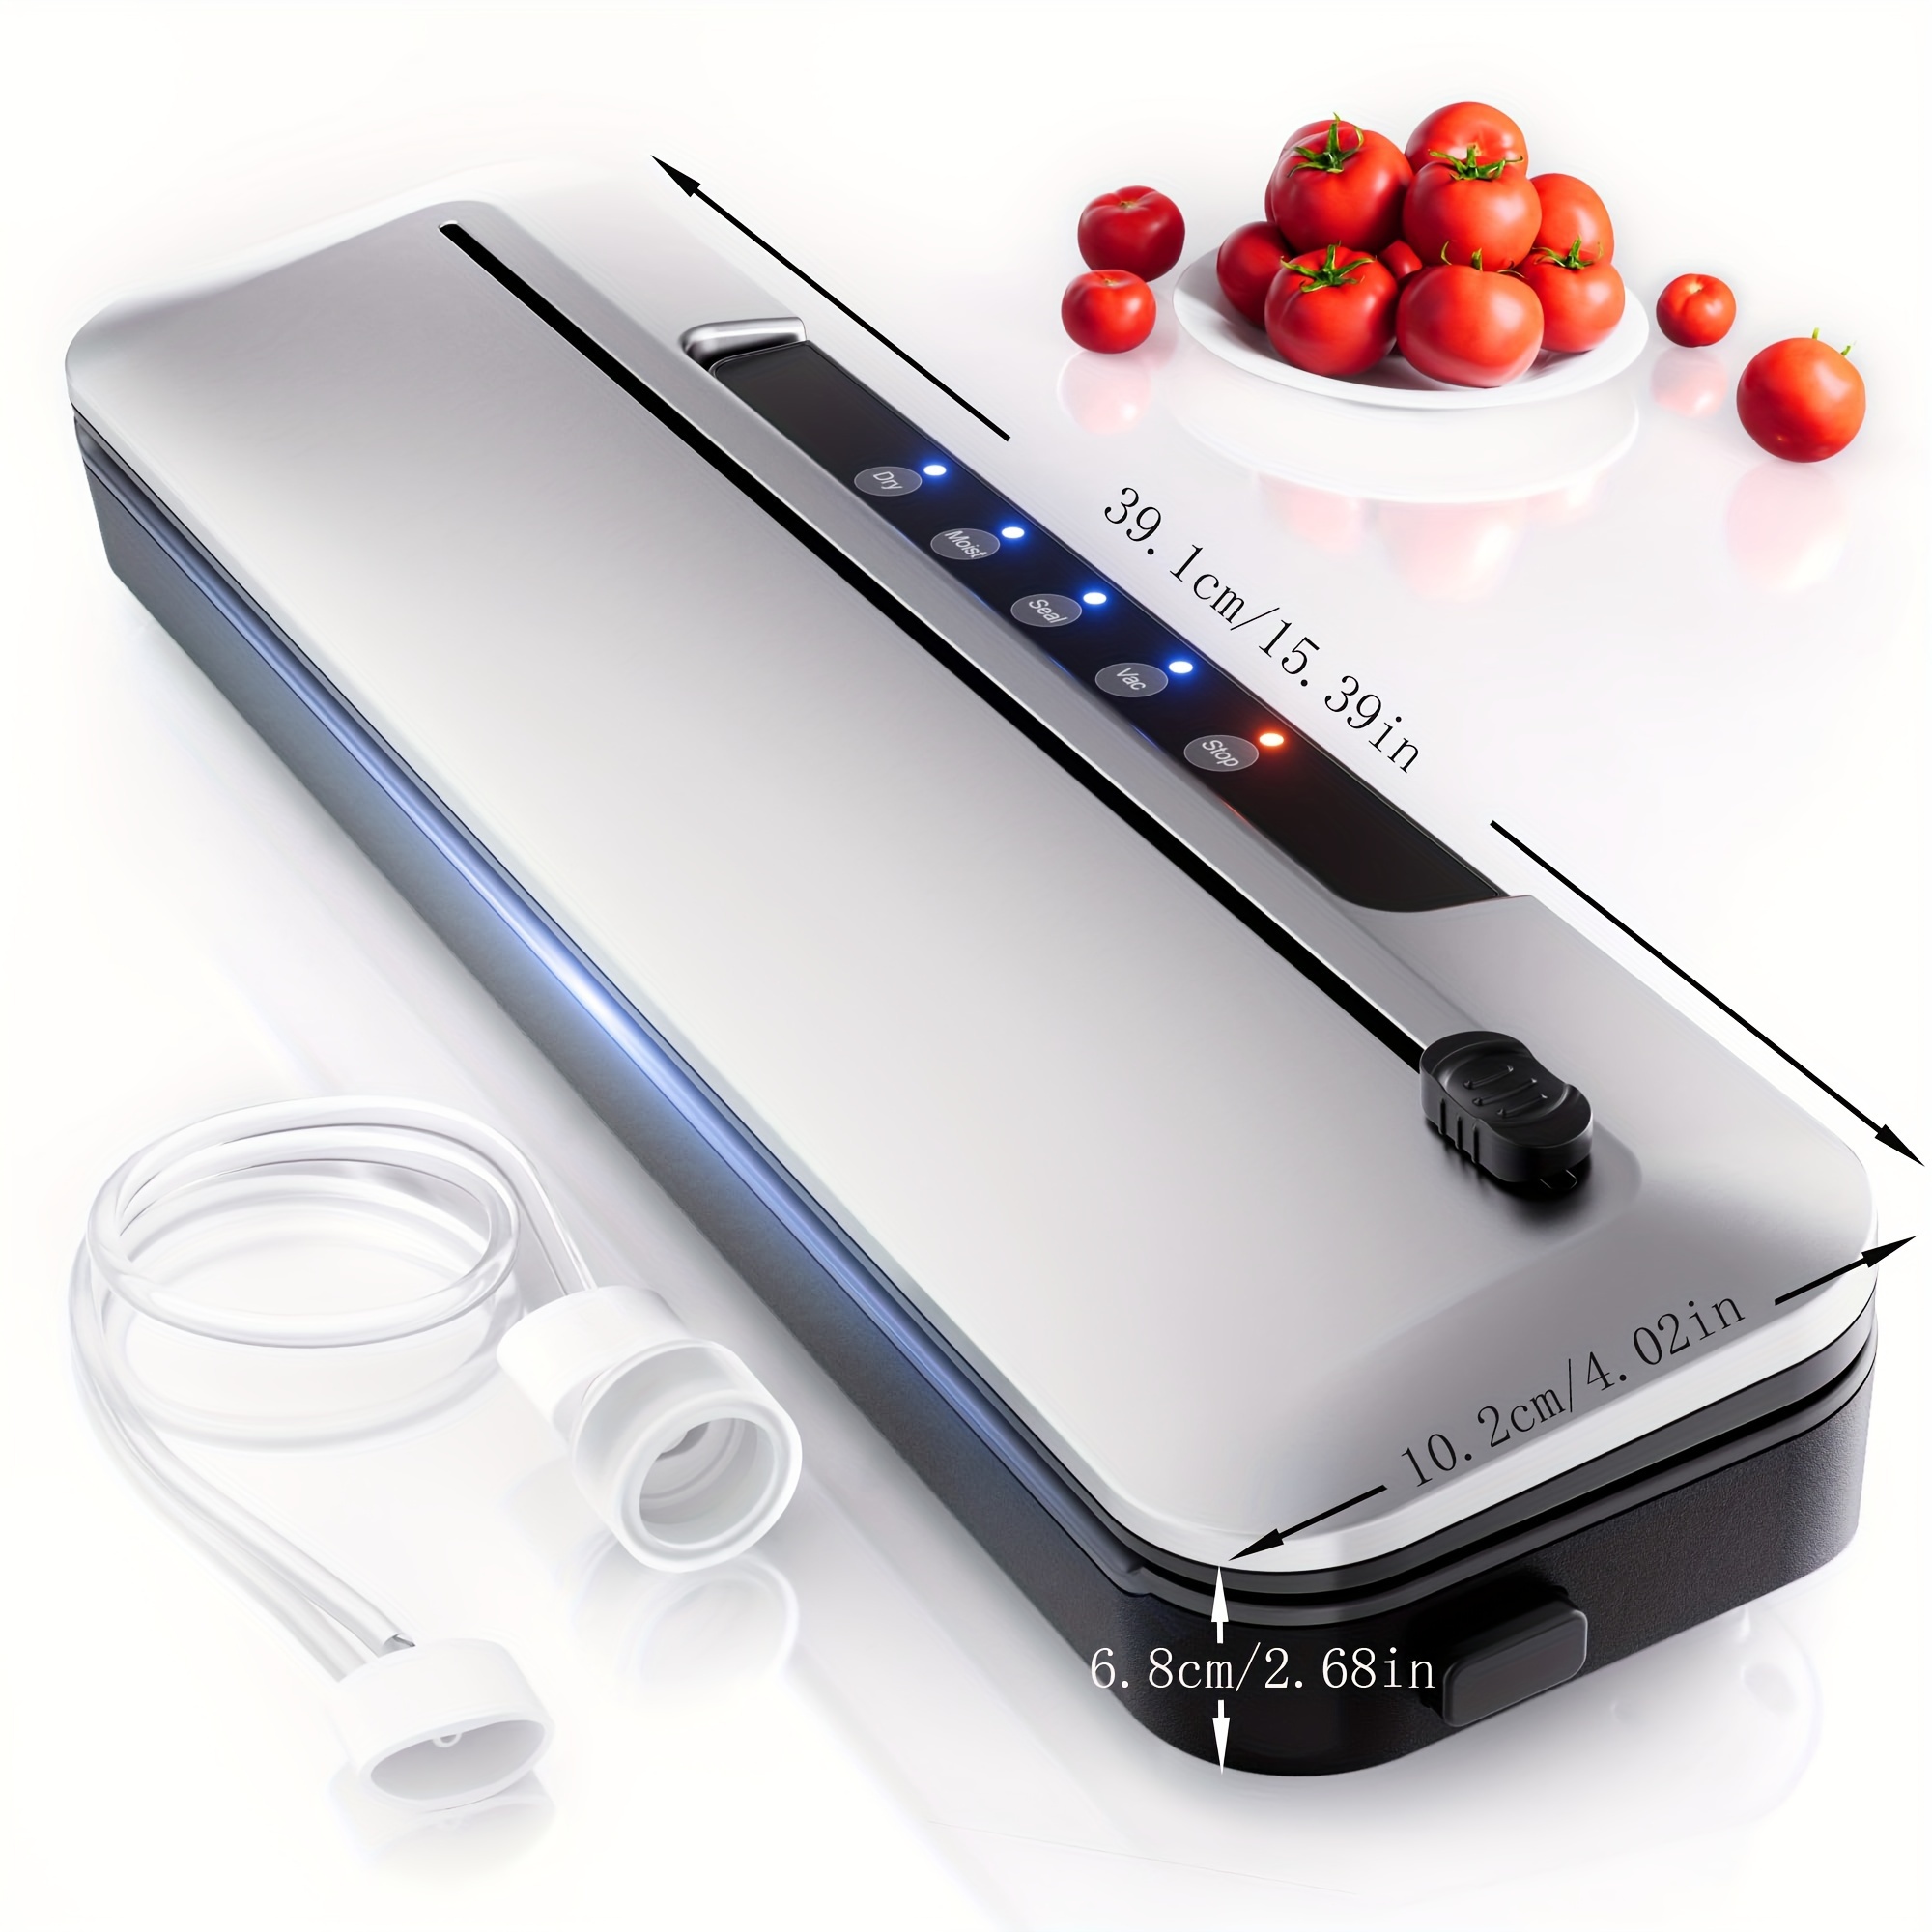 

Vacuum Sealer Machine, 75kpa Suction Power Food Vacuum Saver With Starter Kits With 10 Bags, Automatic Vacuum Sealer For Food Storage, Outside Cutter, Moist&dry Mode